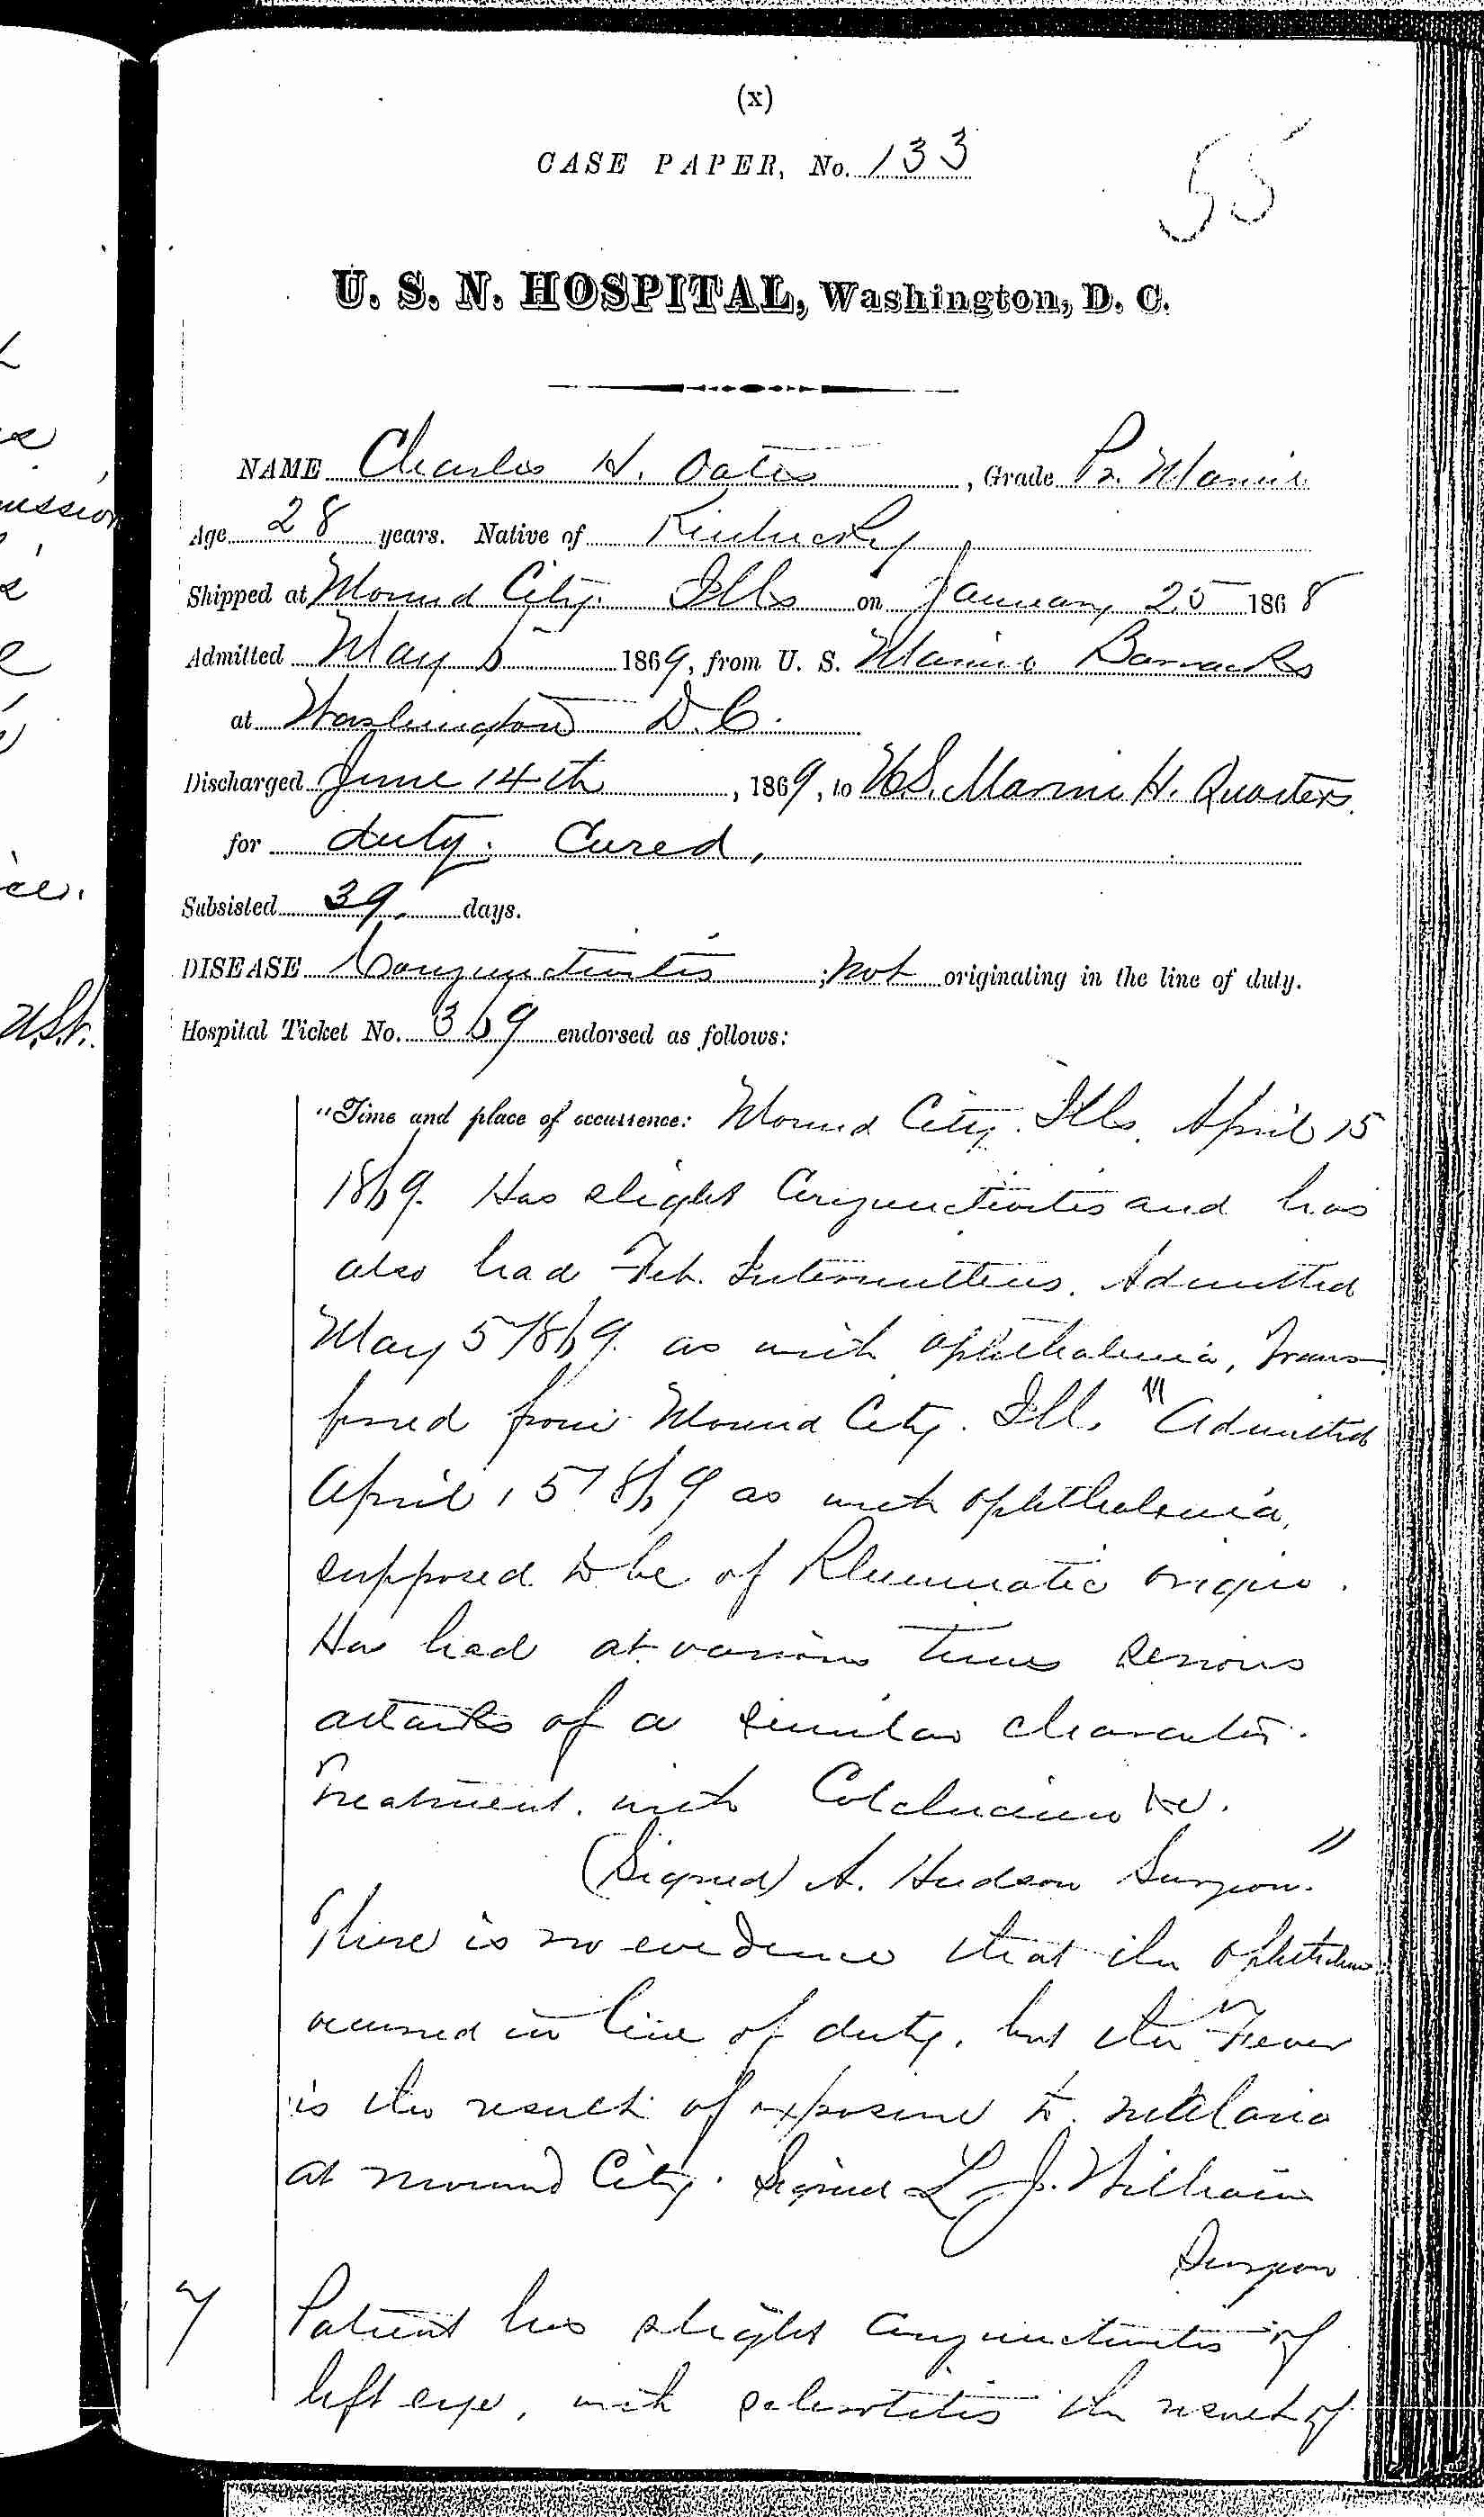 Entry for Charles H. Oates (page 1 of 3) in the log Hospital Tickets and Case Papers - Naval Hospital - Washington, D.C. - 1868-69